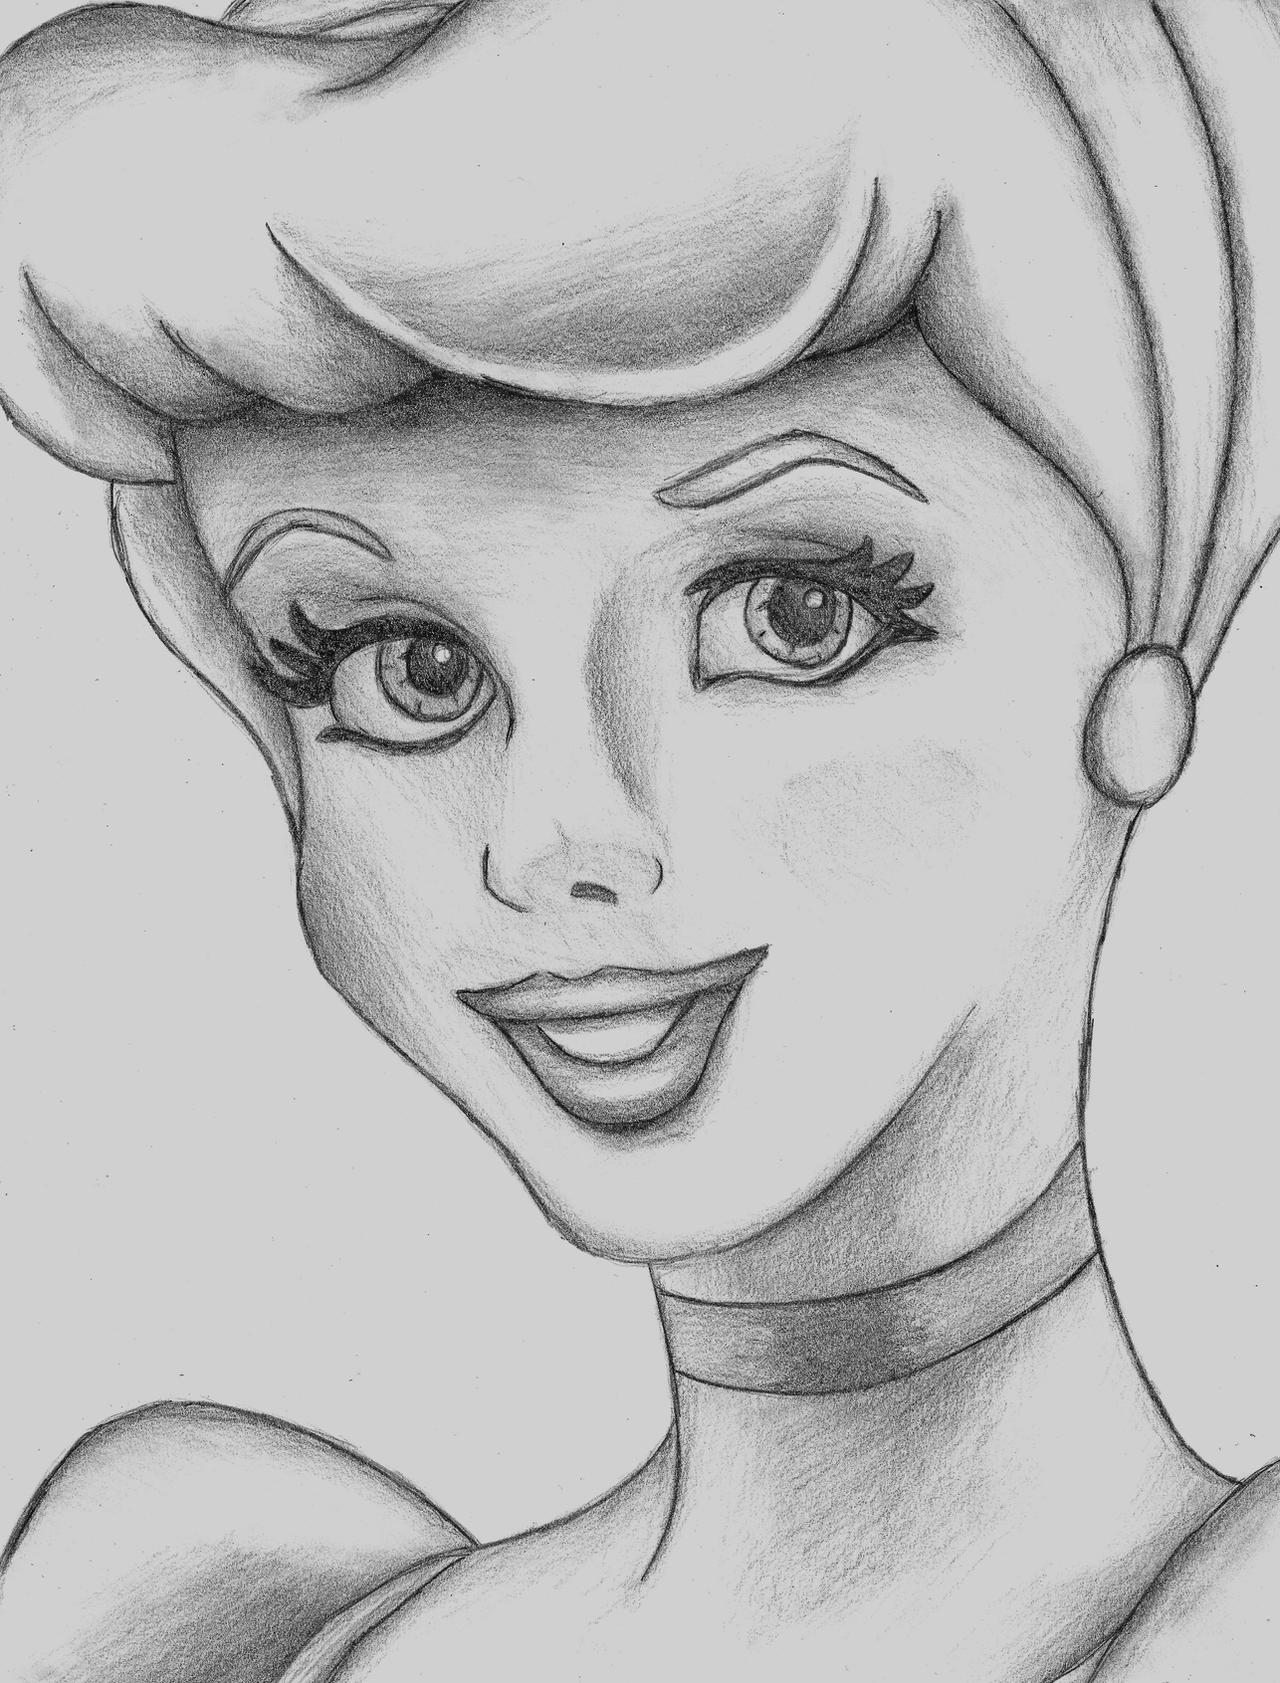  Sketched Disney Drawing with Pencil